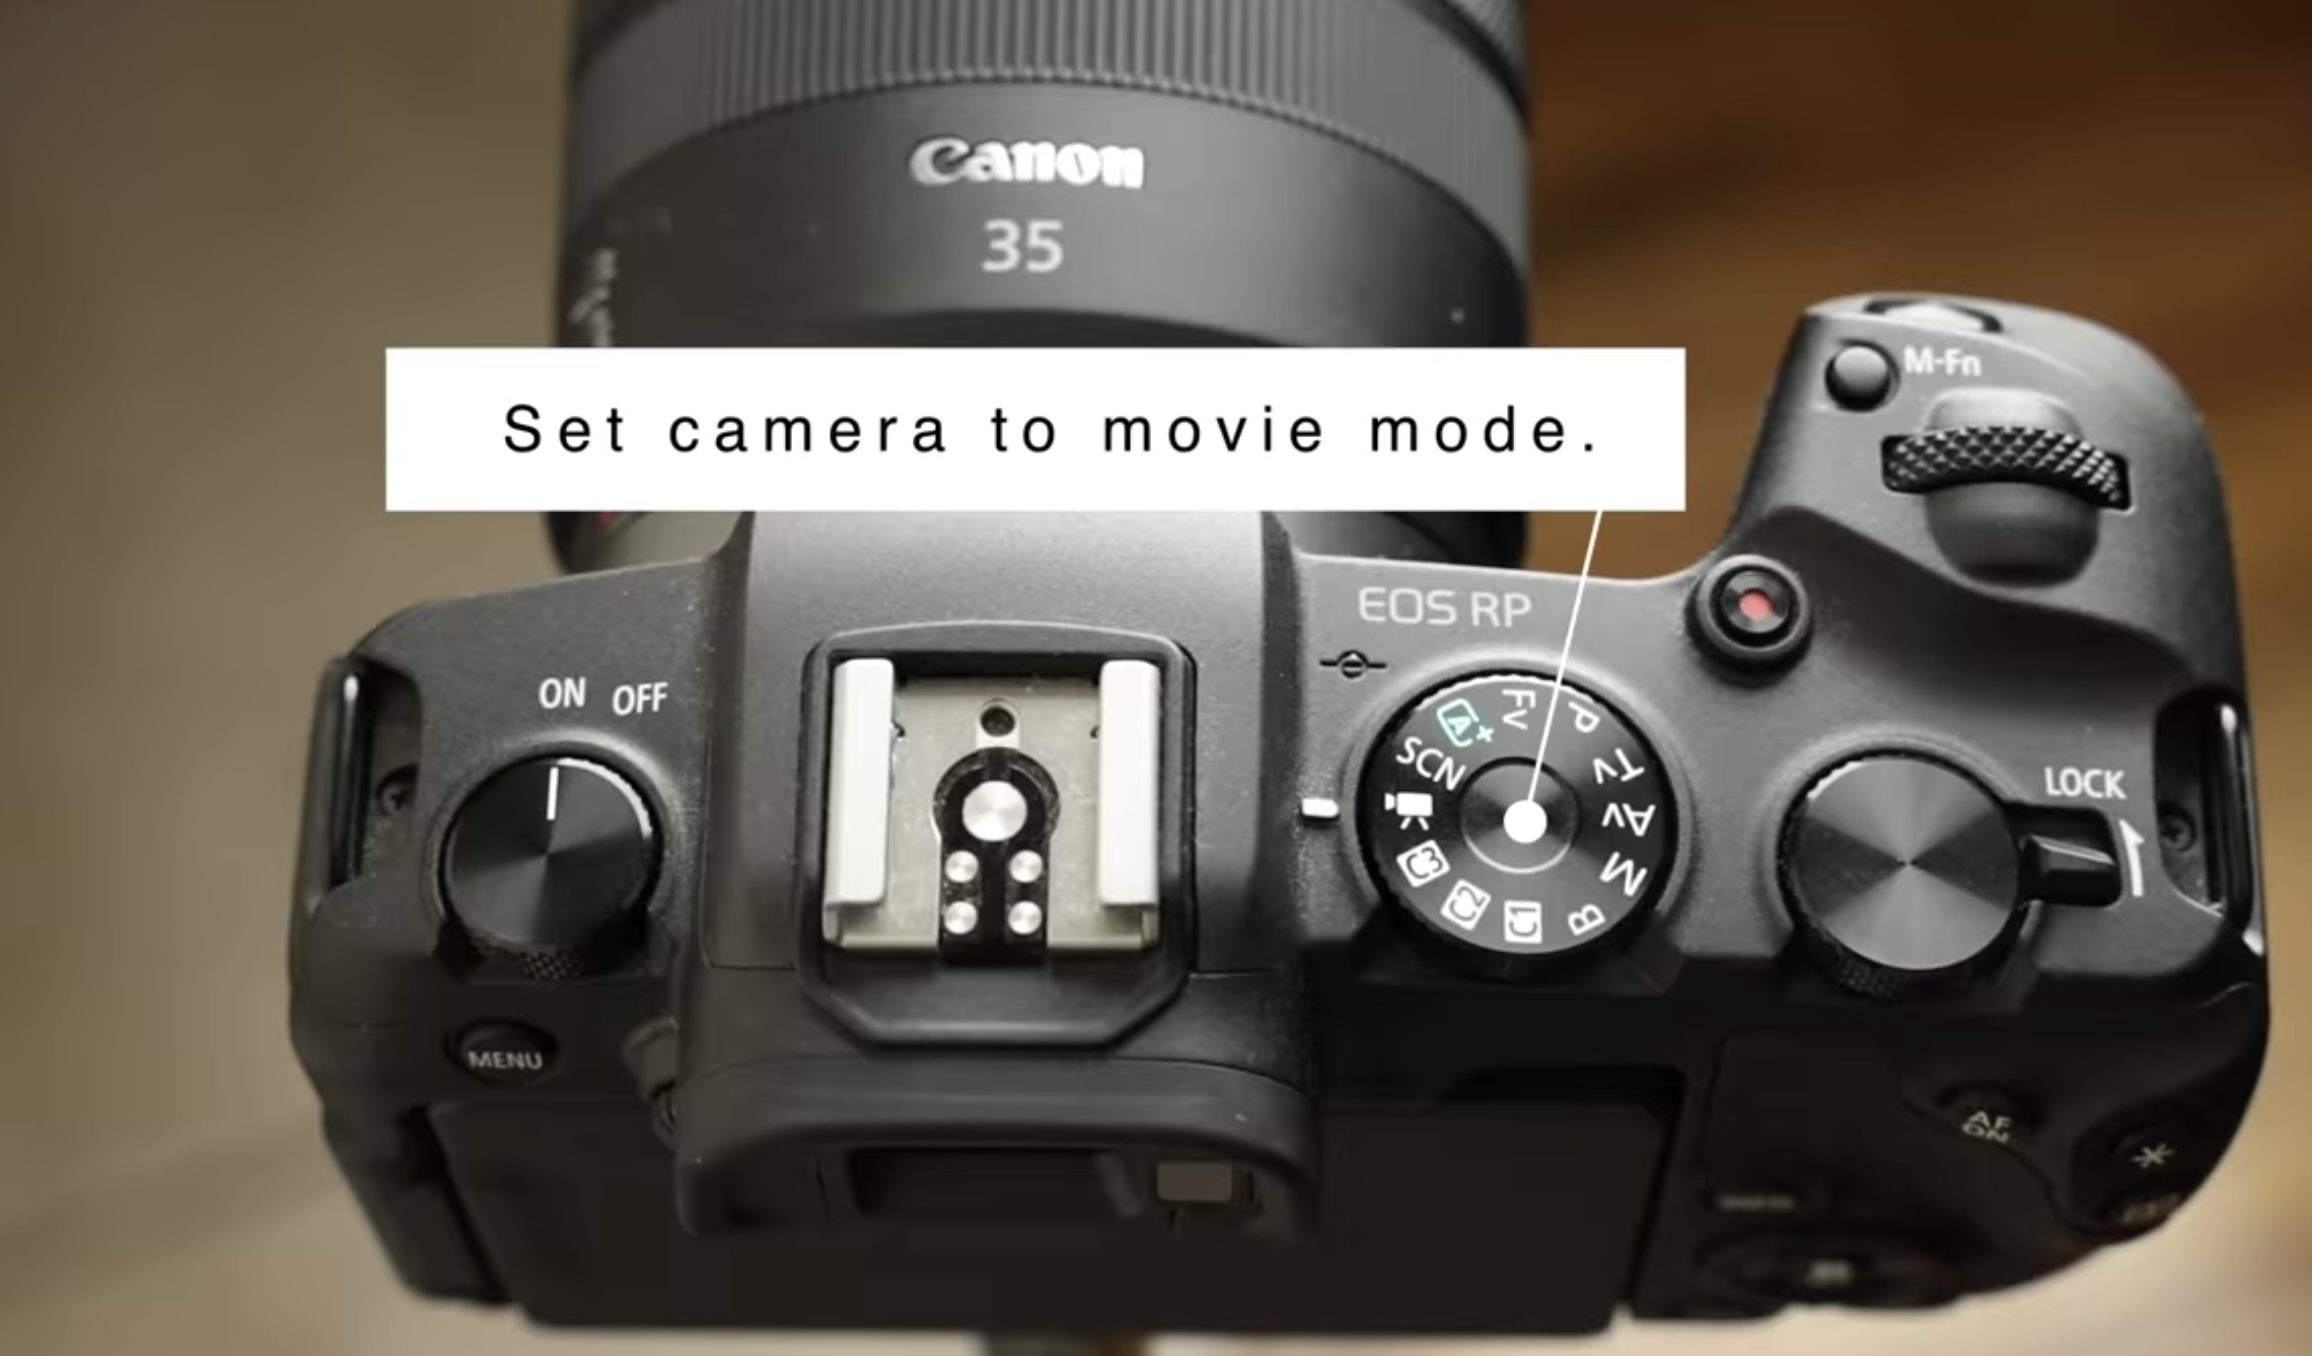 It just got a lot easier to convert your DSLR or mirrorless camera into a webcam for free